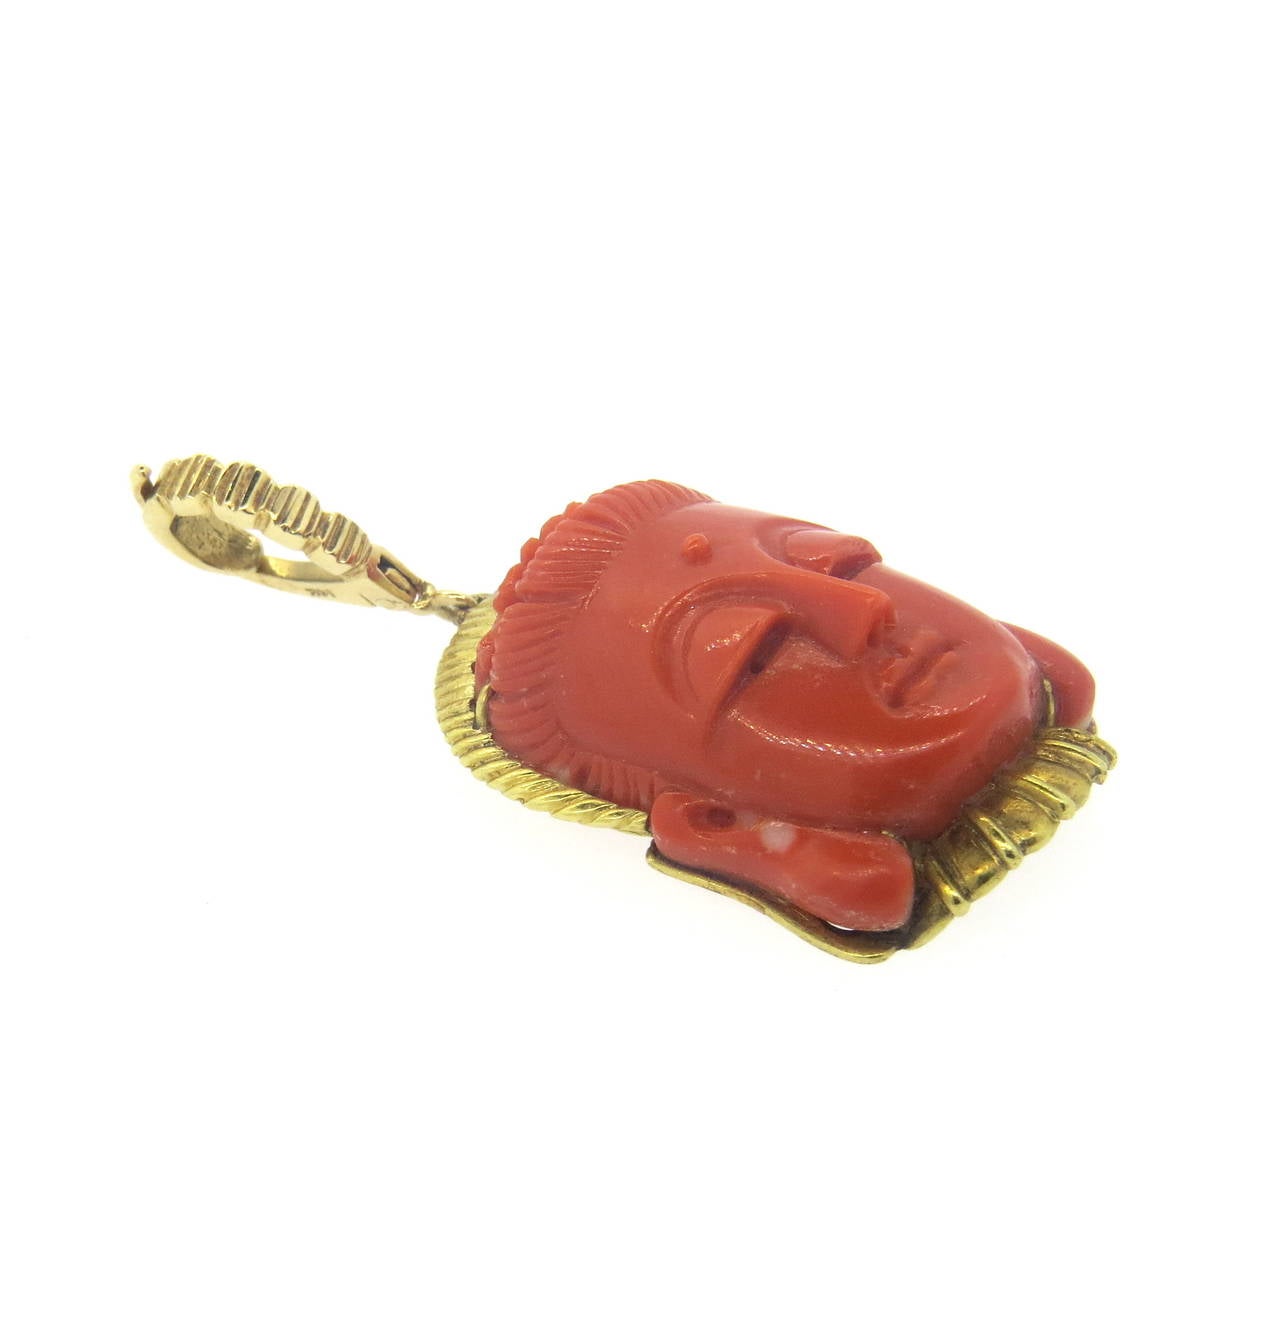 14k gold pendant, featuring carve coral stone. Pendant is 55mm long including the bale x 25mm wide. Marked 14k and Trio. Weight of the piece - 19.1 grams